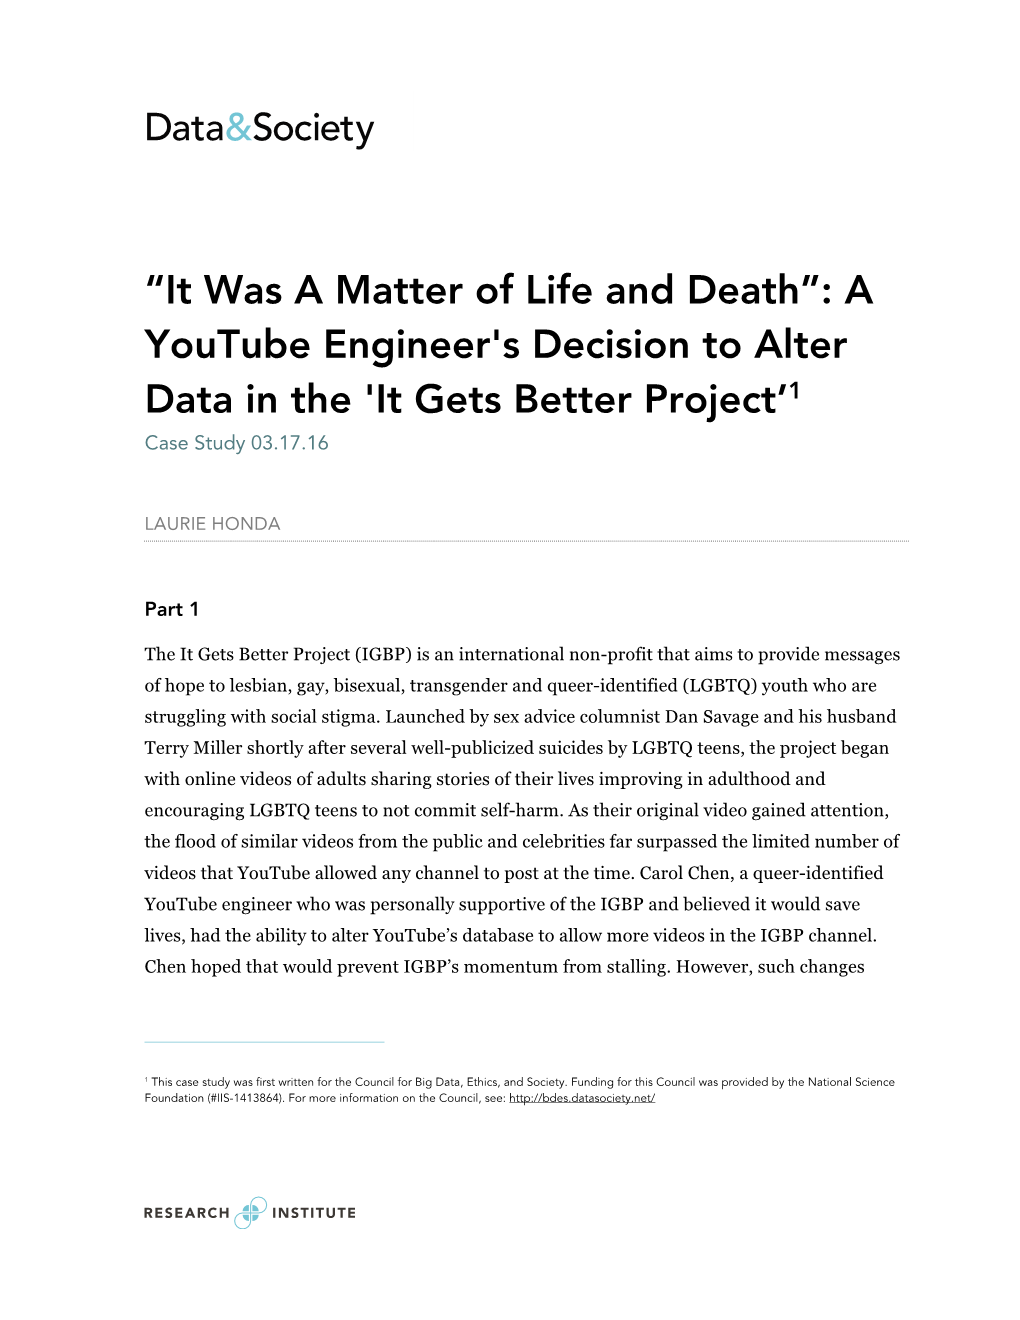 “It Was a Matter of Life and Death”: a Youtube Engineer's Decision to Alter Data in the 'It Gets Better Project’1 Case Study 03.17.16